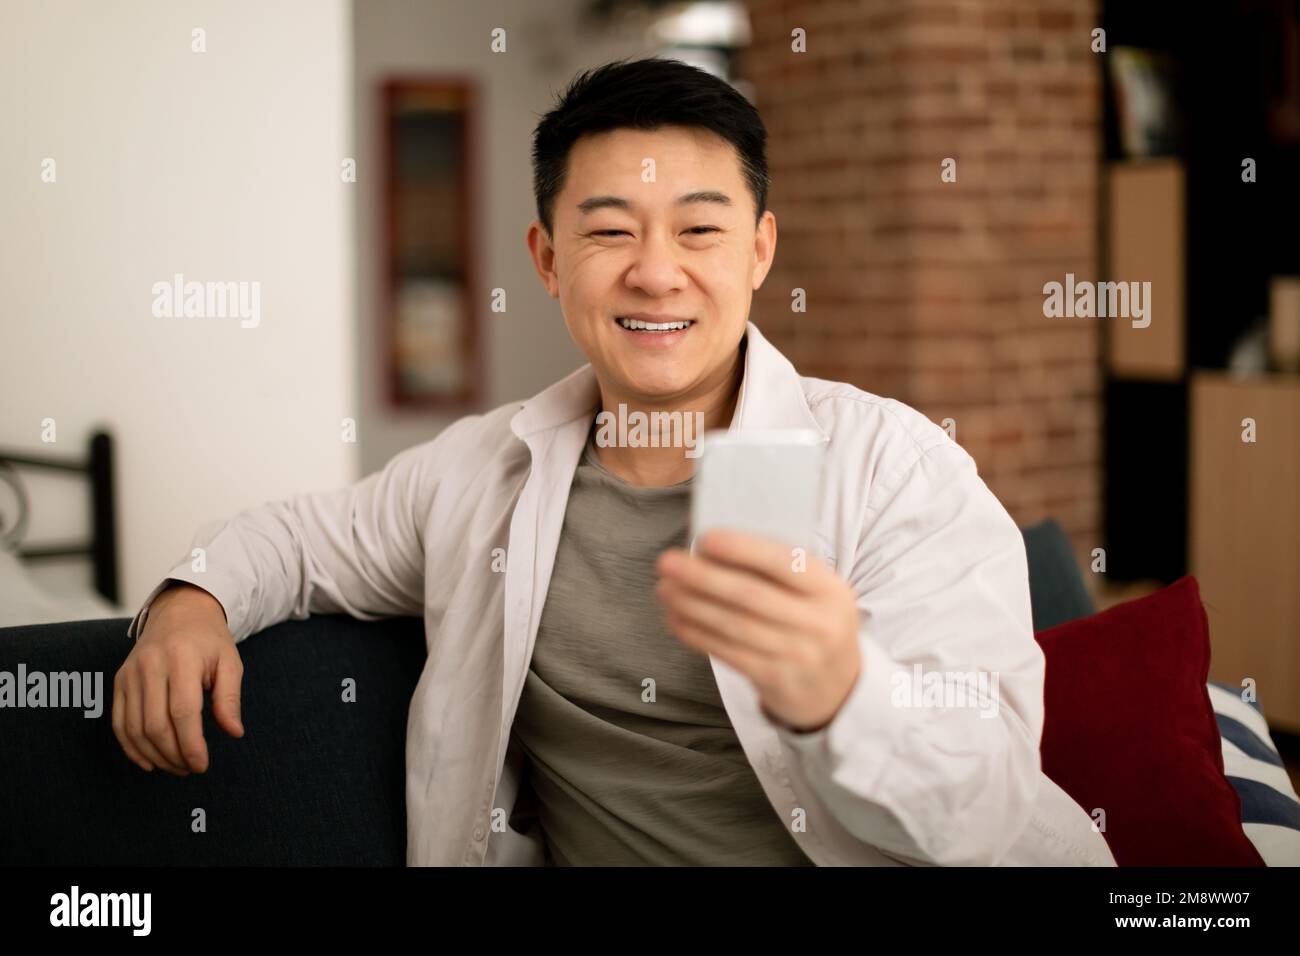 Happy mature asian man in casual watching video or chatting on smartphone, resting on sofa in living room interior Stock Photo